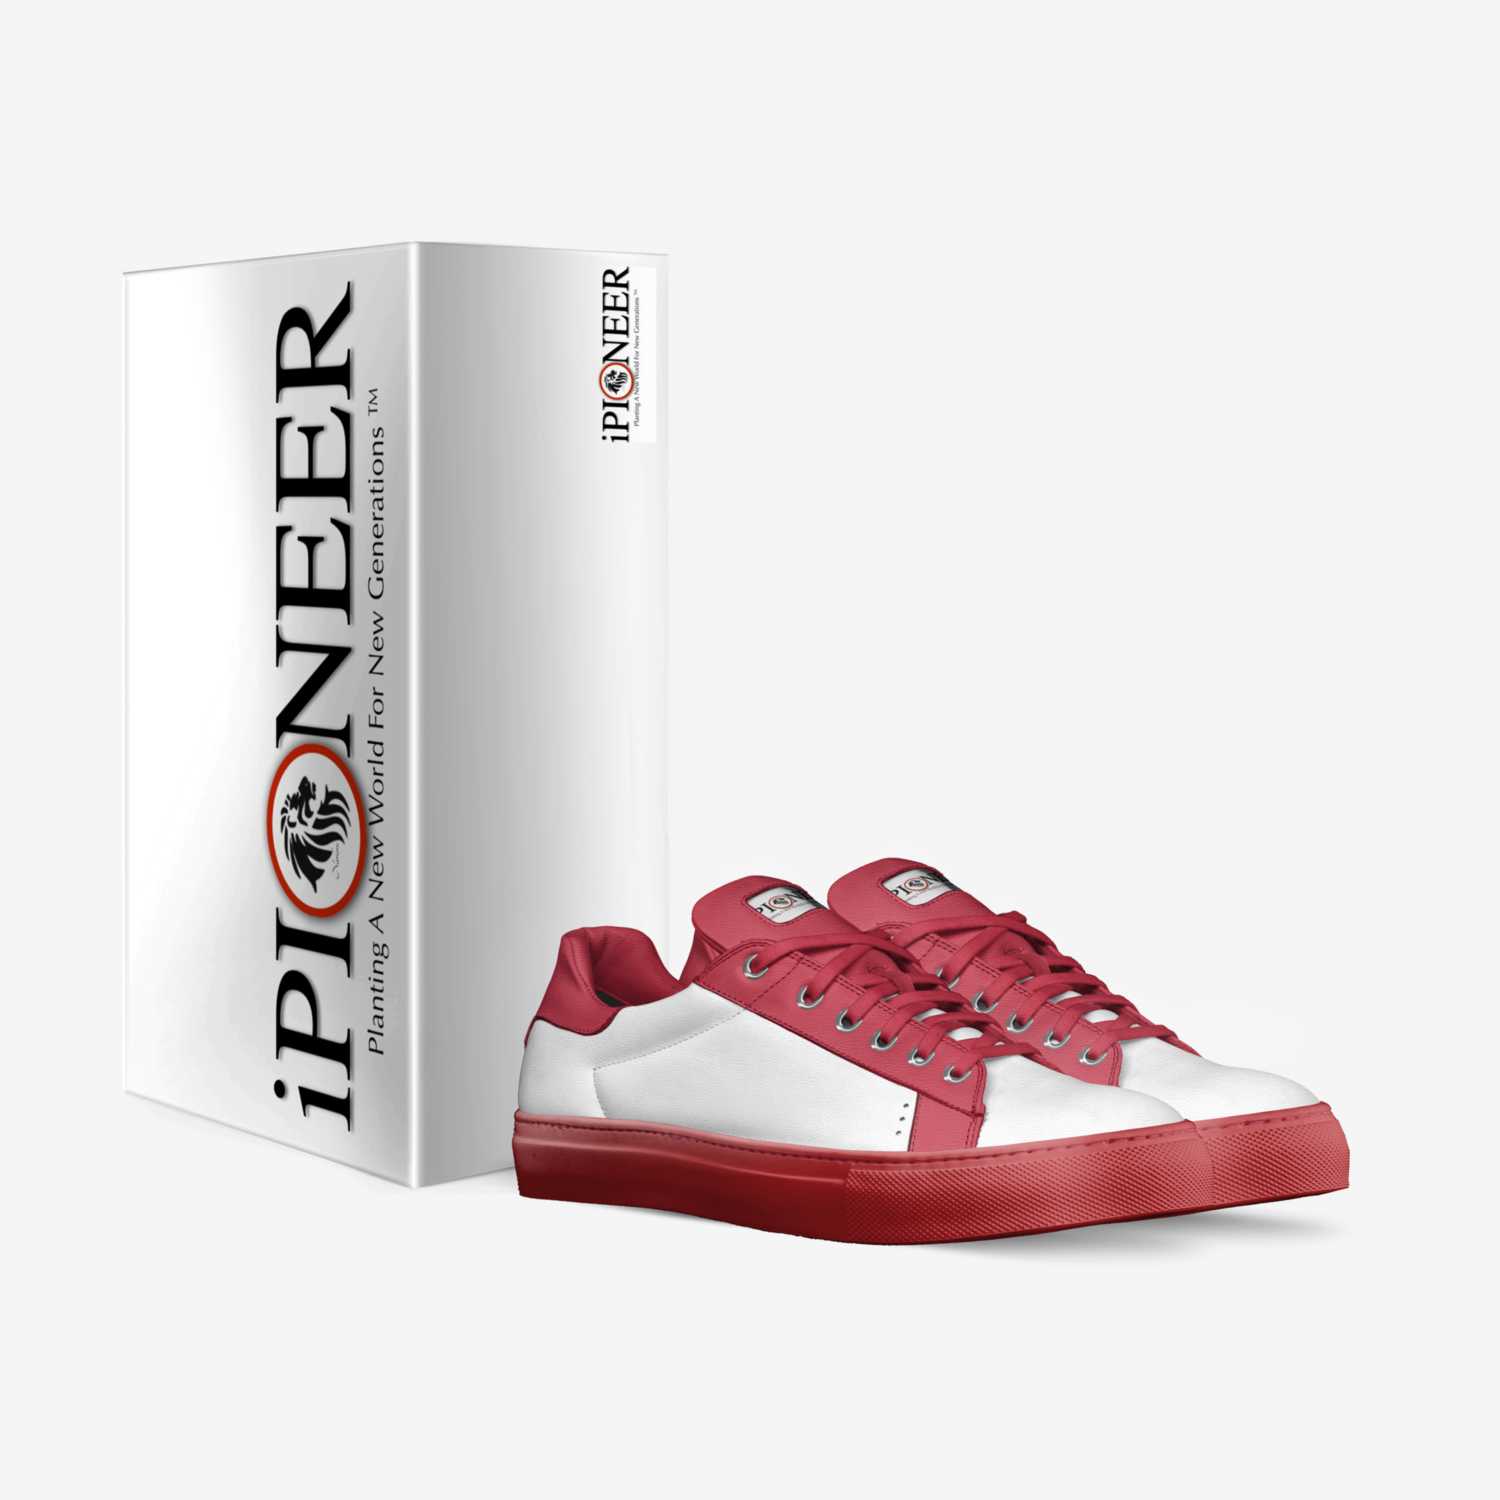 iPioneerUrban custom made in Italy shoes by Marlon D. Hester Sr. | Box view